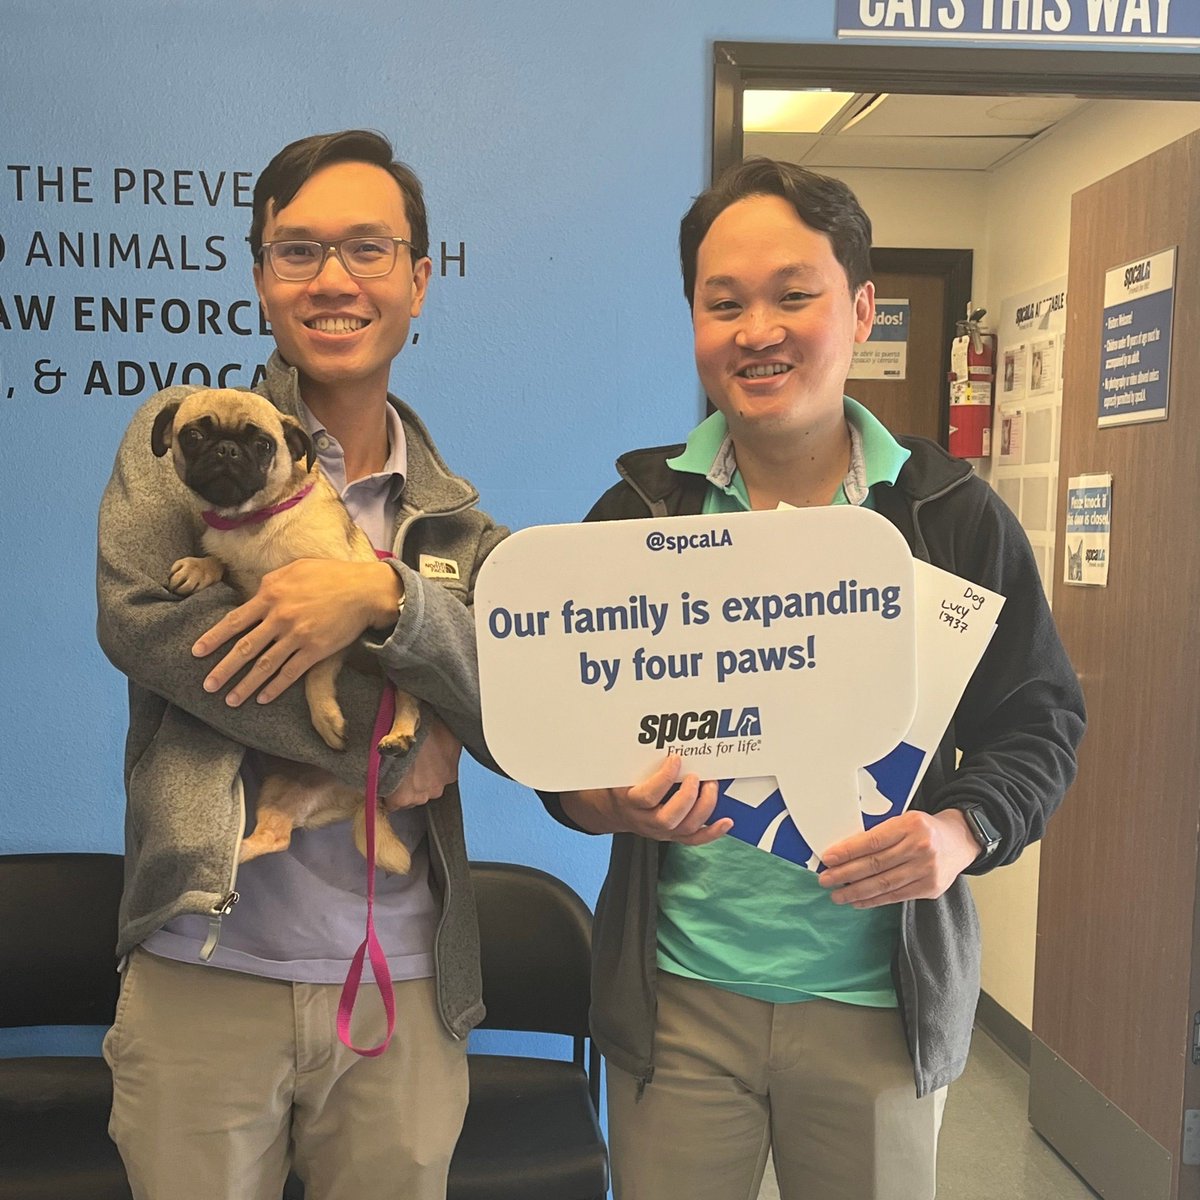 So long, Lucy! This family is expanding by four paws🐾🐾

#FriendsForLife #spcaLAadopt #spcaLAalum #HappyAdoption #AdoptDontShop